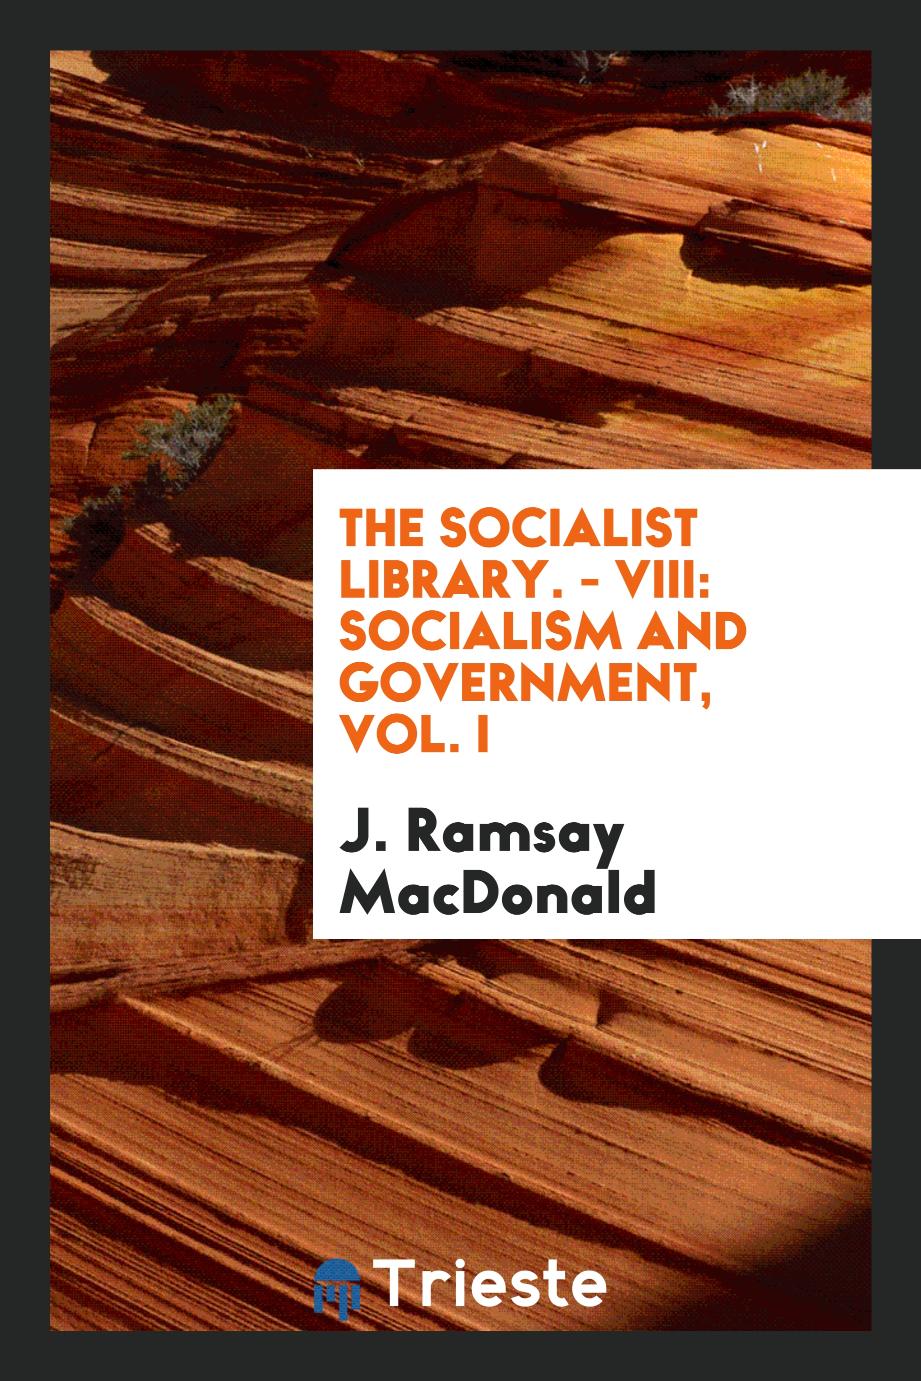 The Socialist Library. - VIII: Socialism and Government, Vol. I